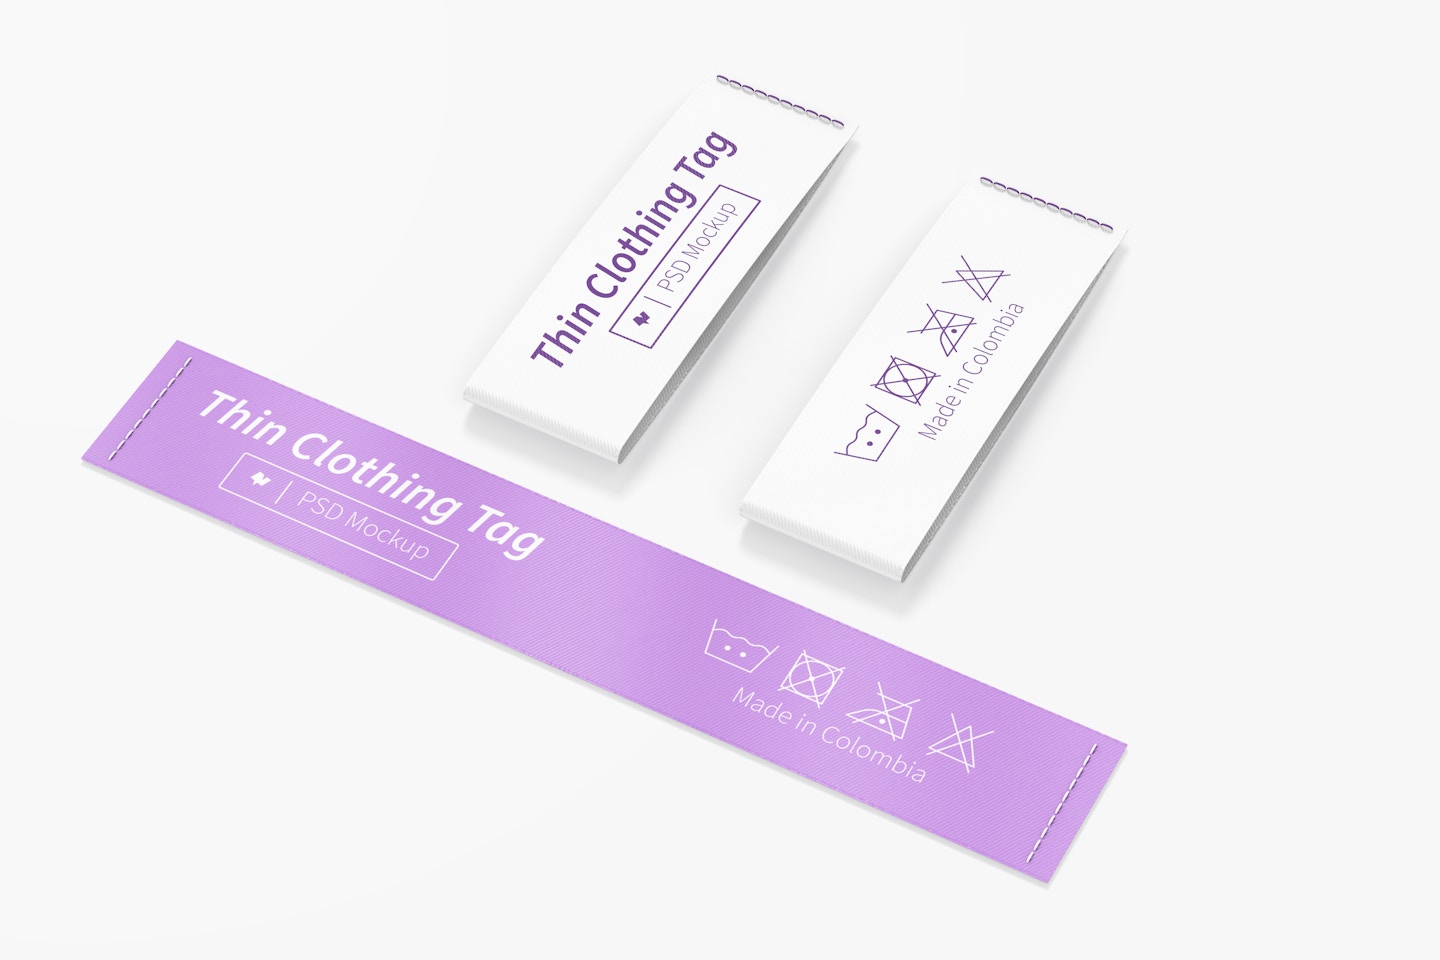 Vertical Thin Clothing Tags Mockup, Perspective